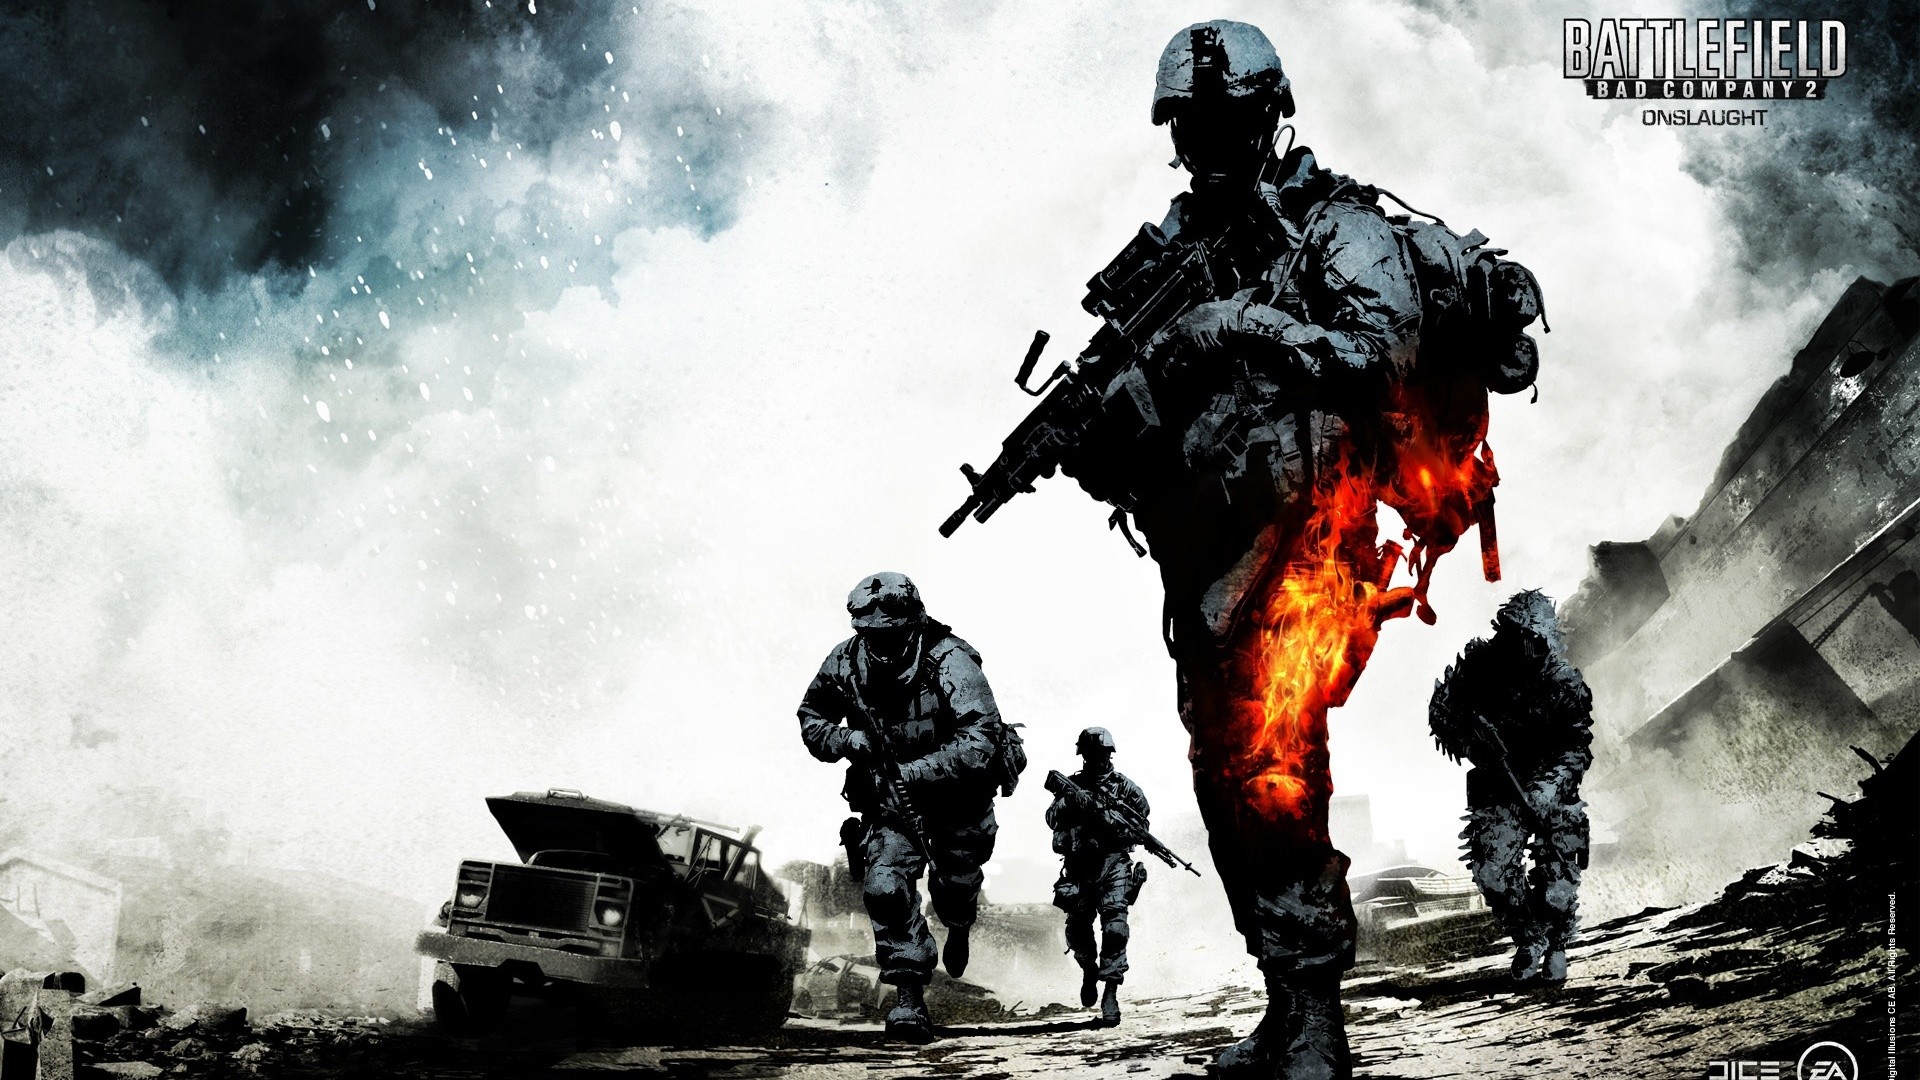 Video Games Battlefield Bad Company 2 Soldier Video Game Art 1920x1080